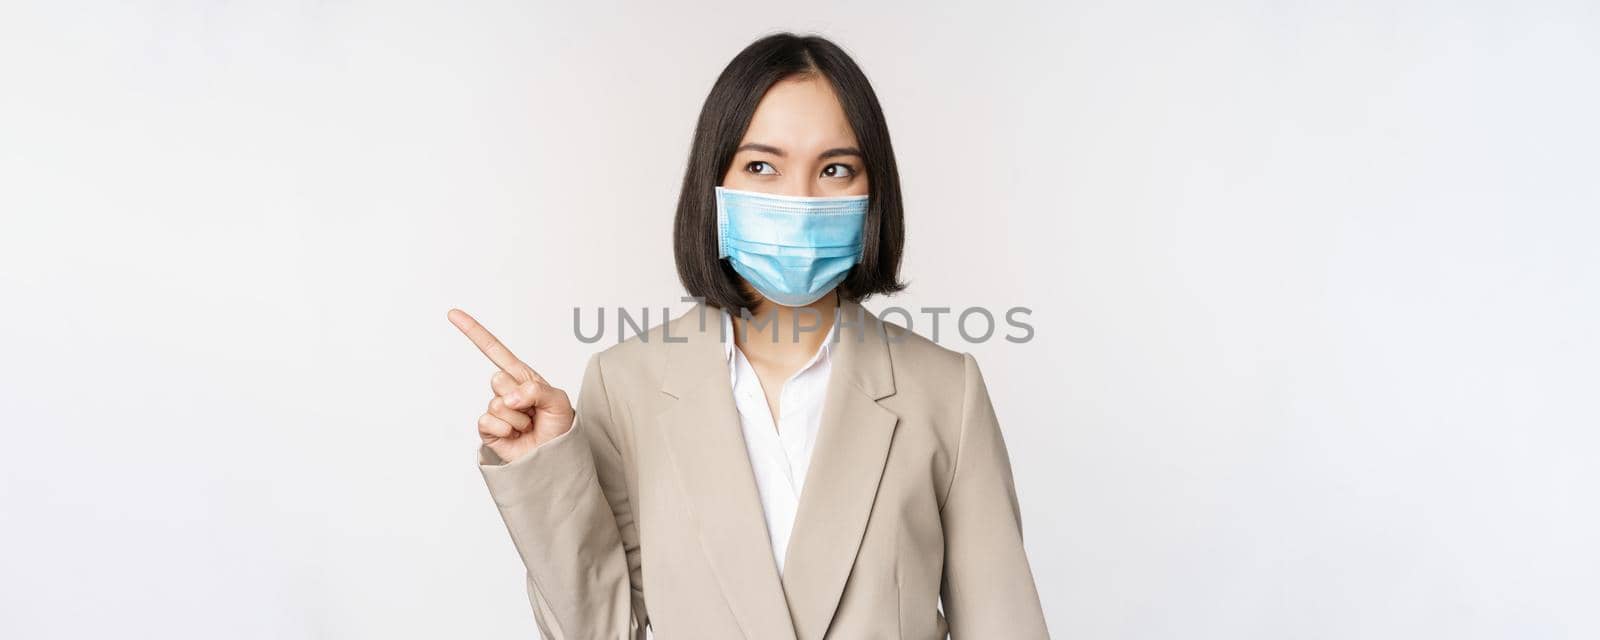 Enthusiastic businesswoman pointing fingers left, wearing medical face mask from covid-19 pandemic, standing over white background.